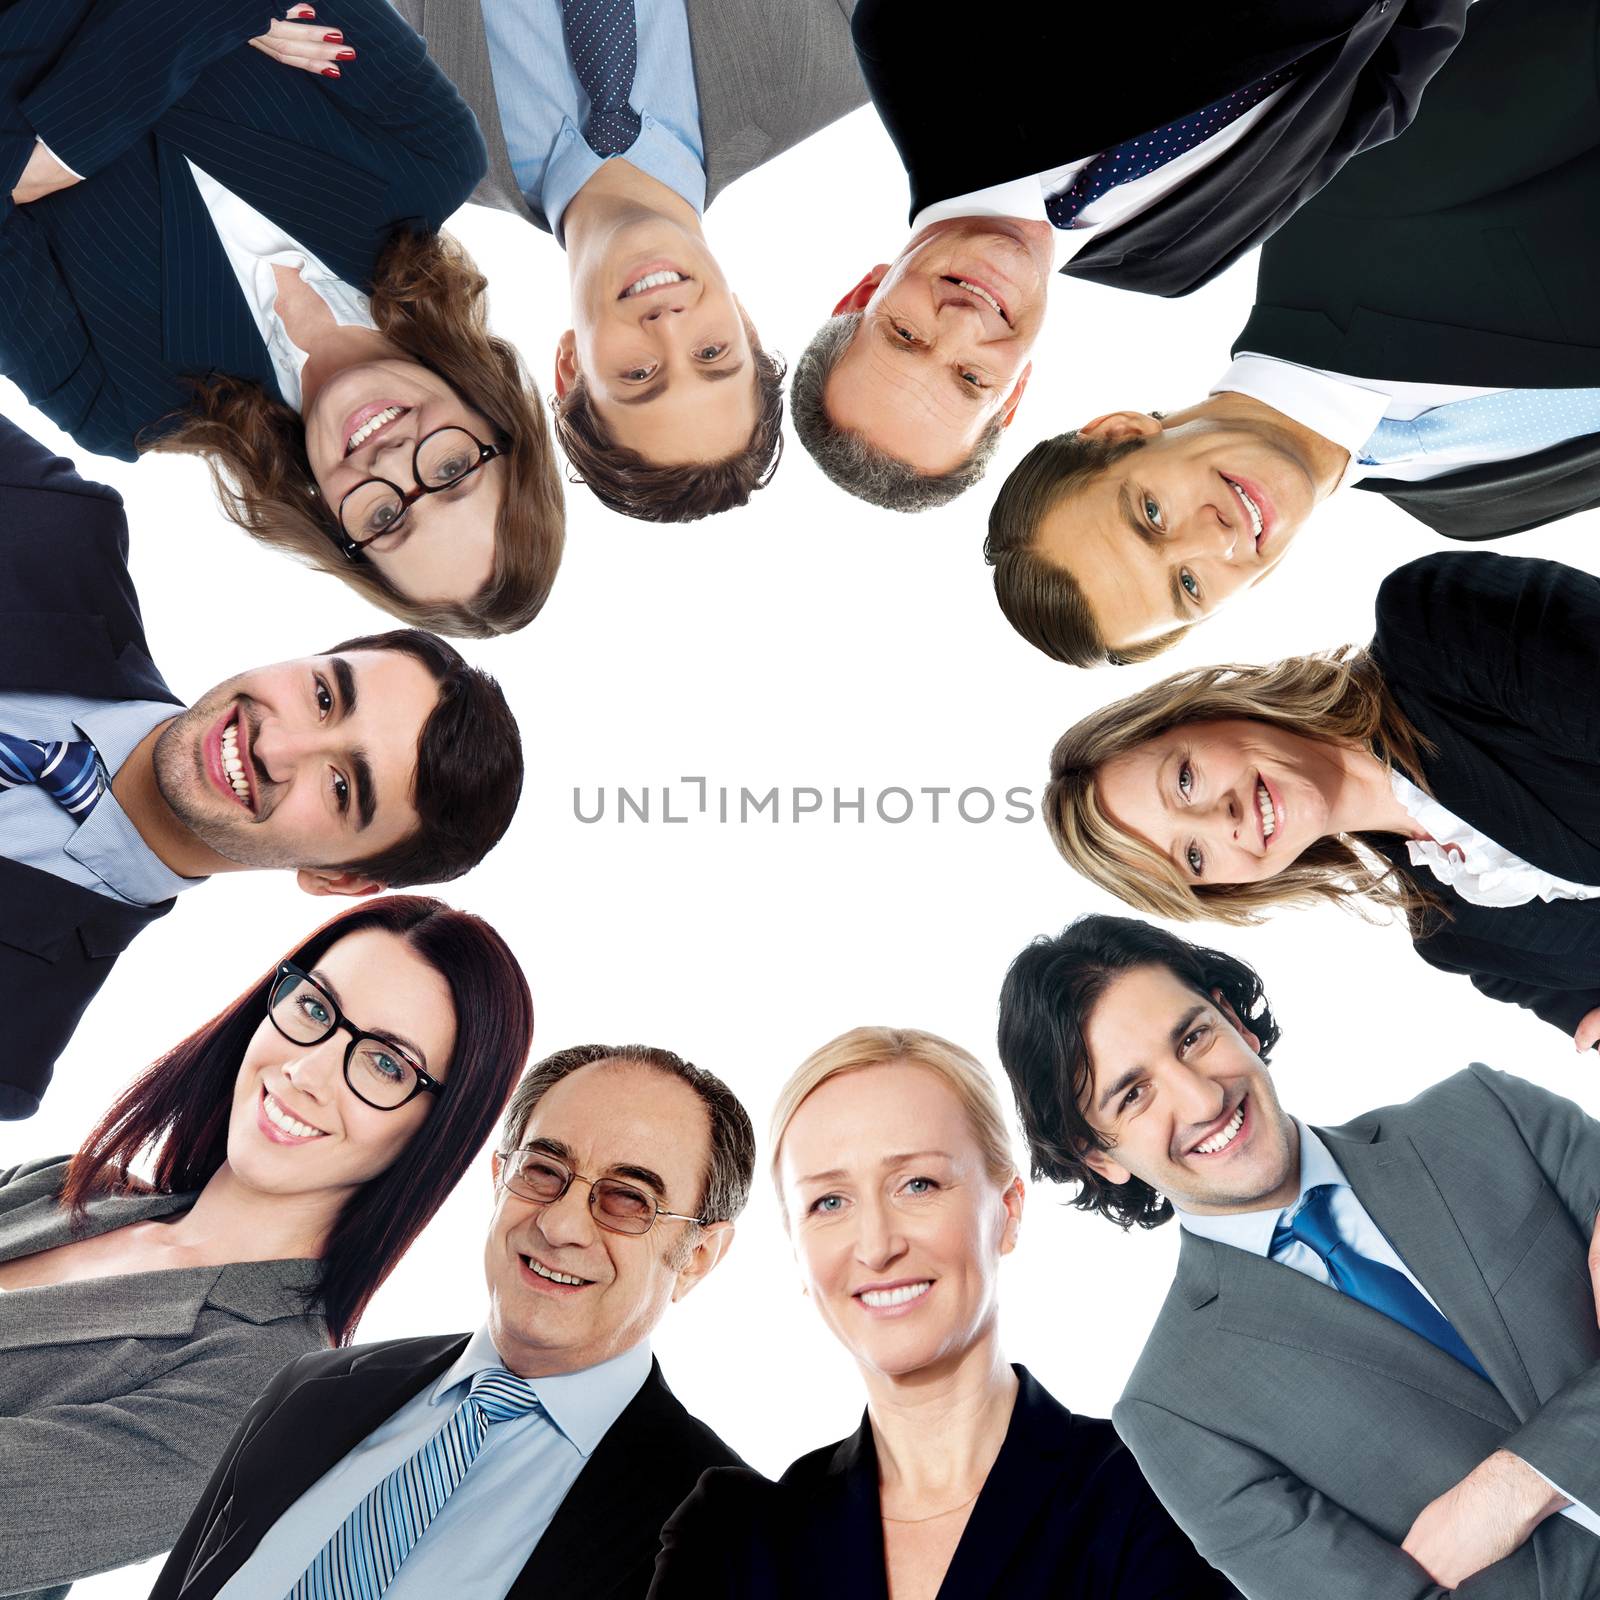 Circular formation of smiling business people